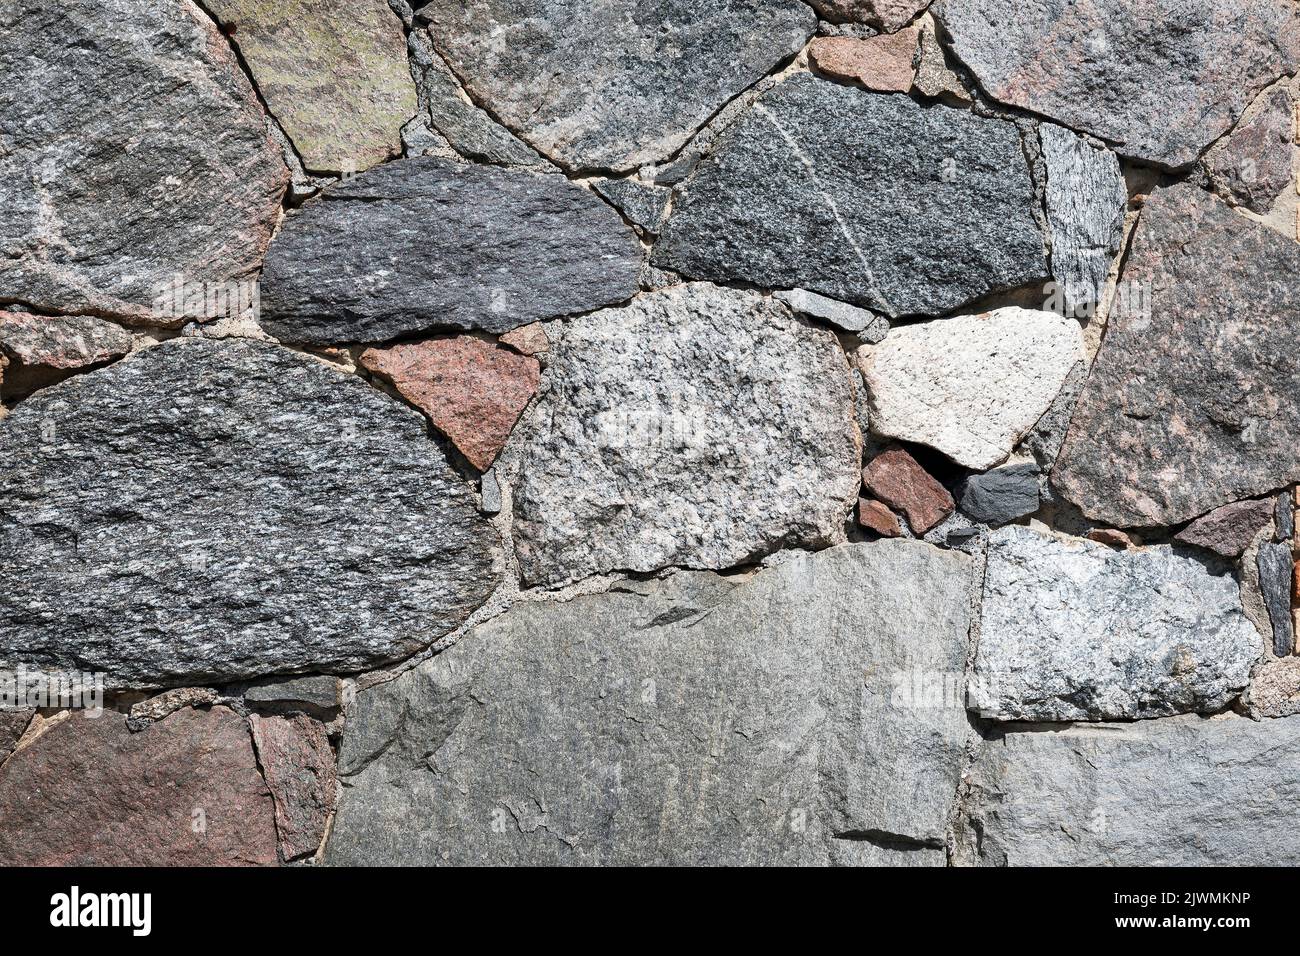 Stone wall with different colors and size of rocks Stock Photo